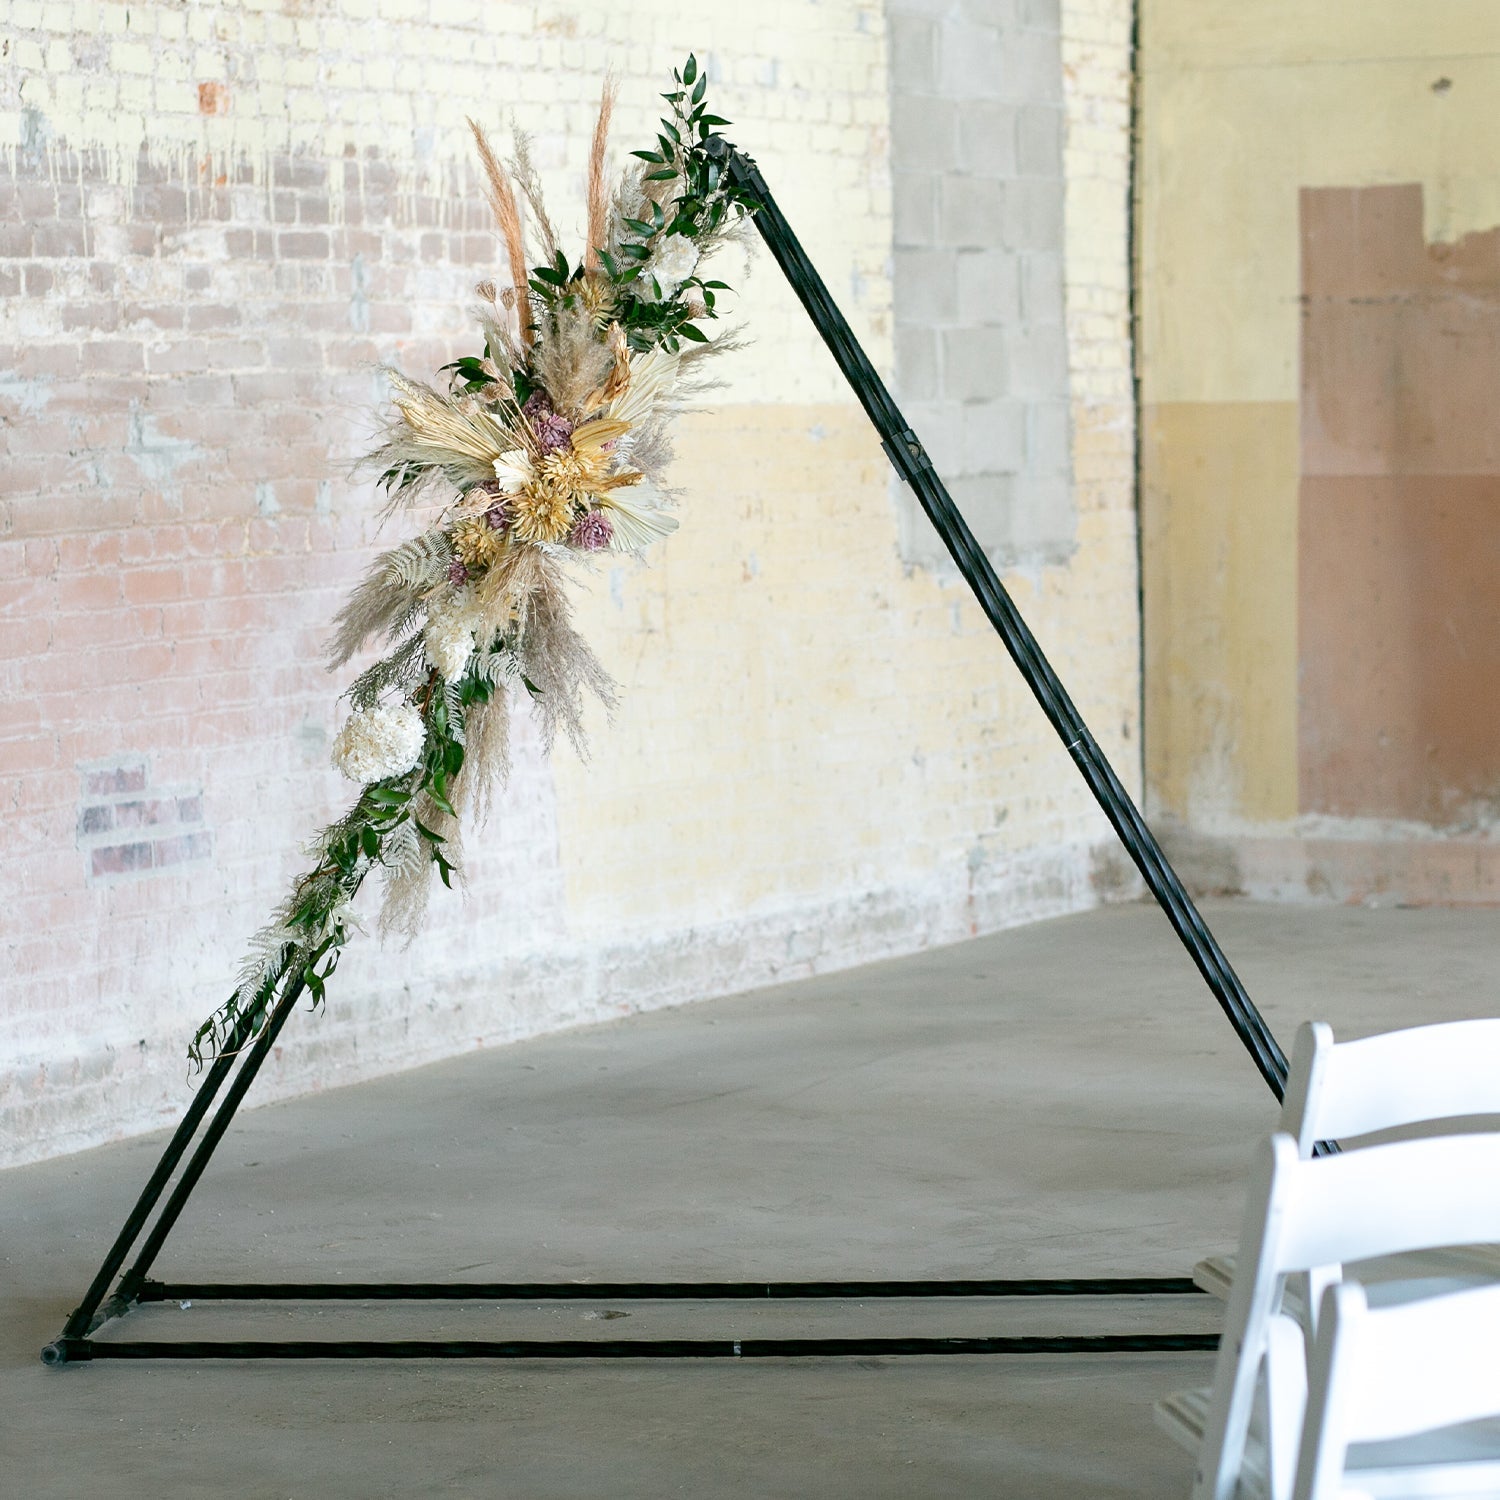 Elegant wedding arch in a triangle shape with hanging greenery. - 46 & Spruce